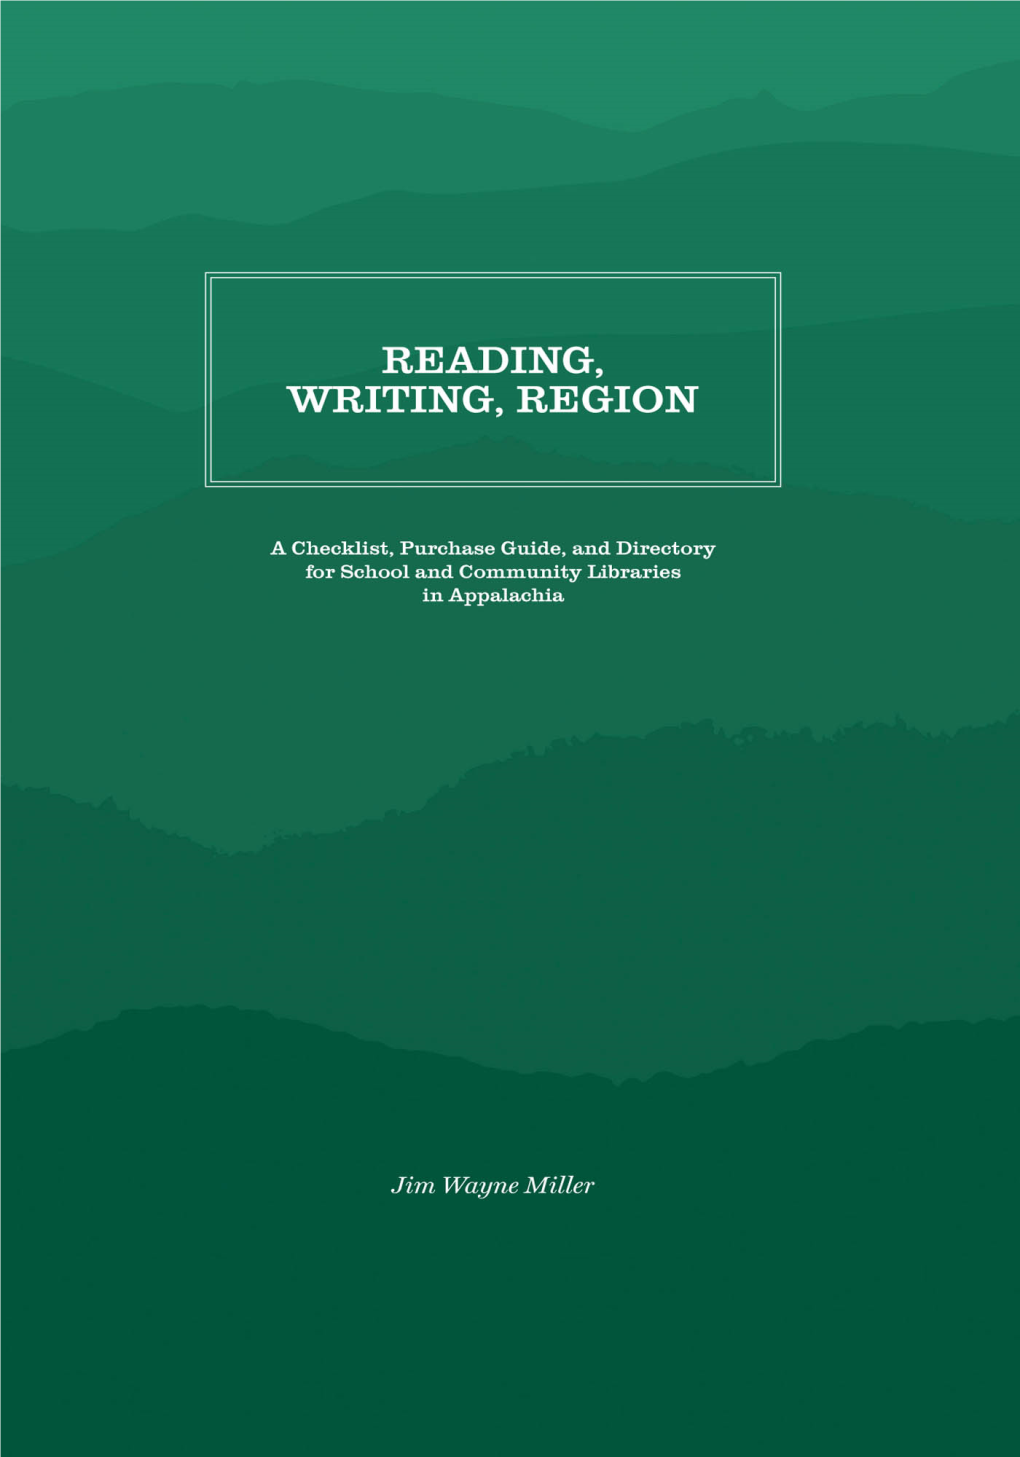 Reading, Writing, Region: a Checklist, Purchase Guide and Directory for School and Community Libraries in Appalachia